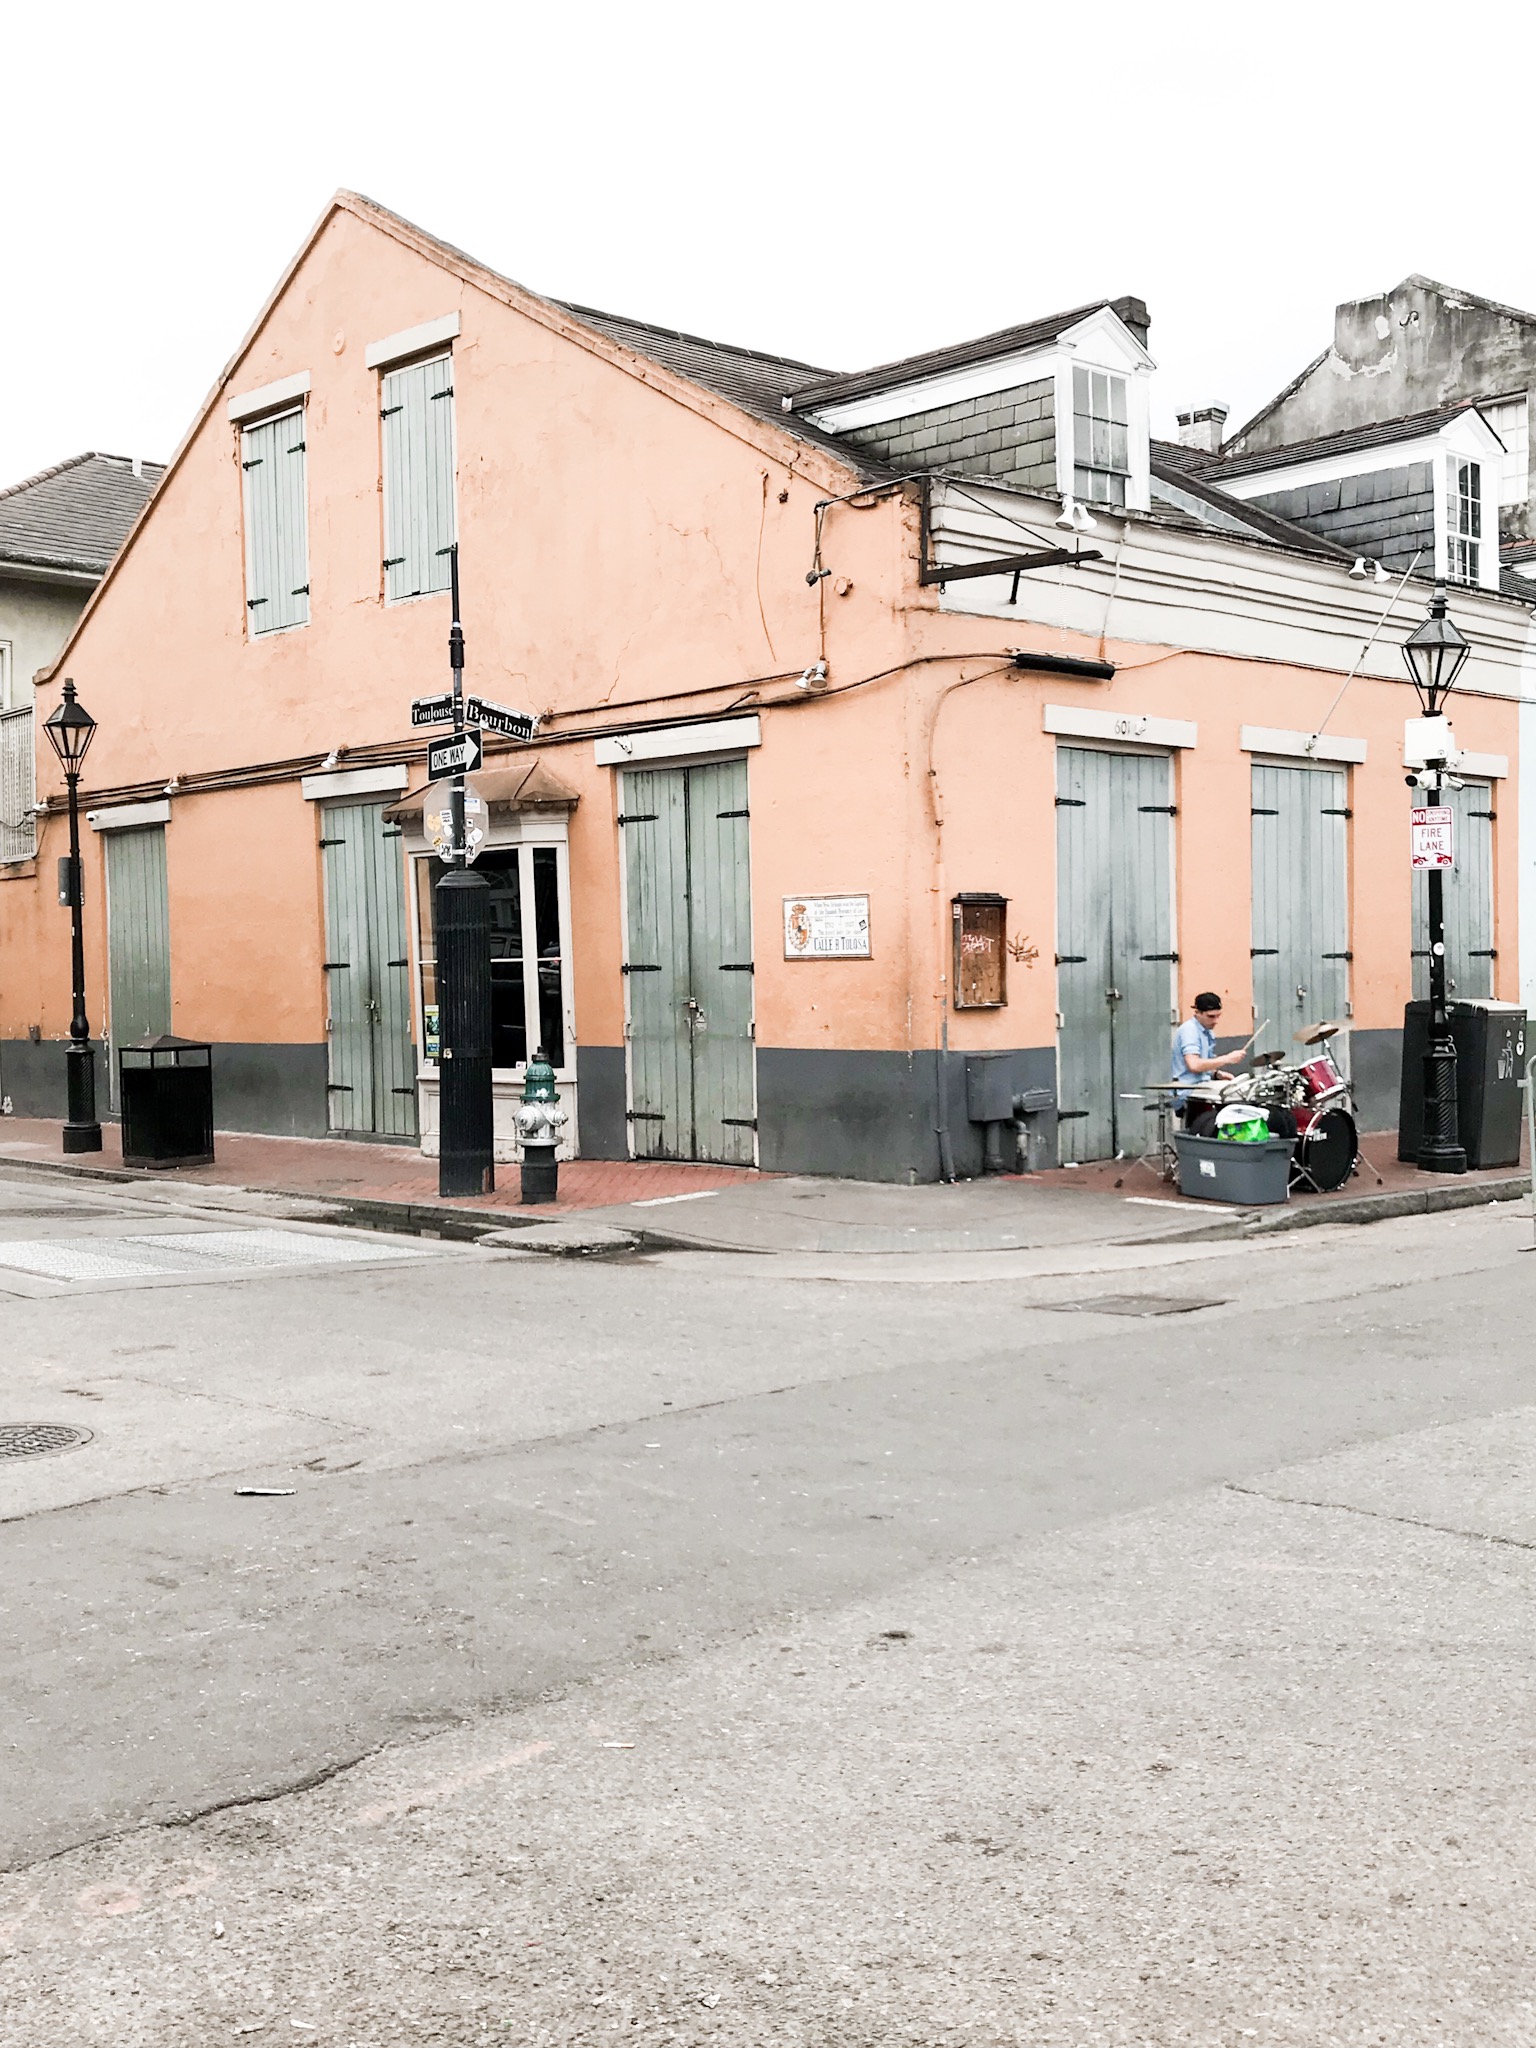 BOURBON ST., nola, new orleans, what to do in nola, where to go in nola